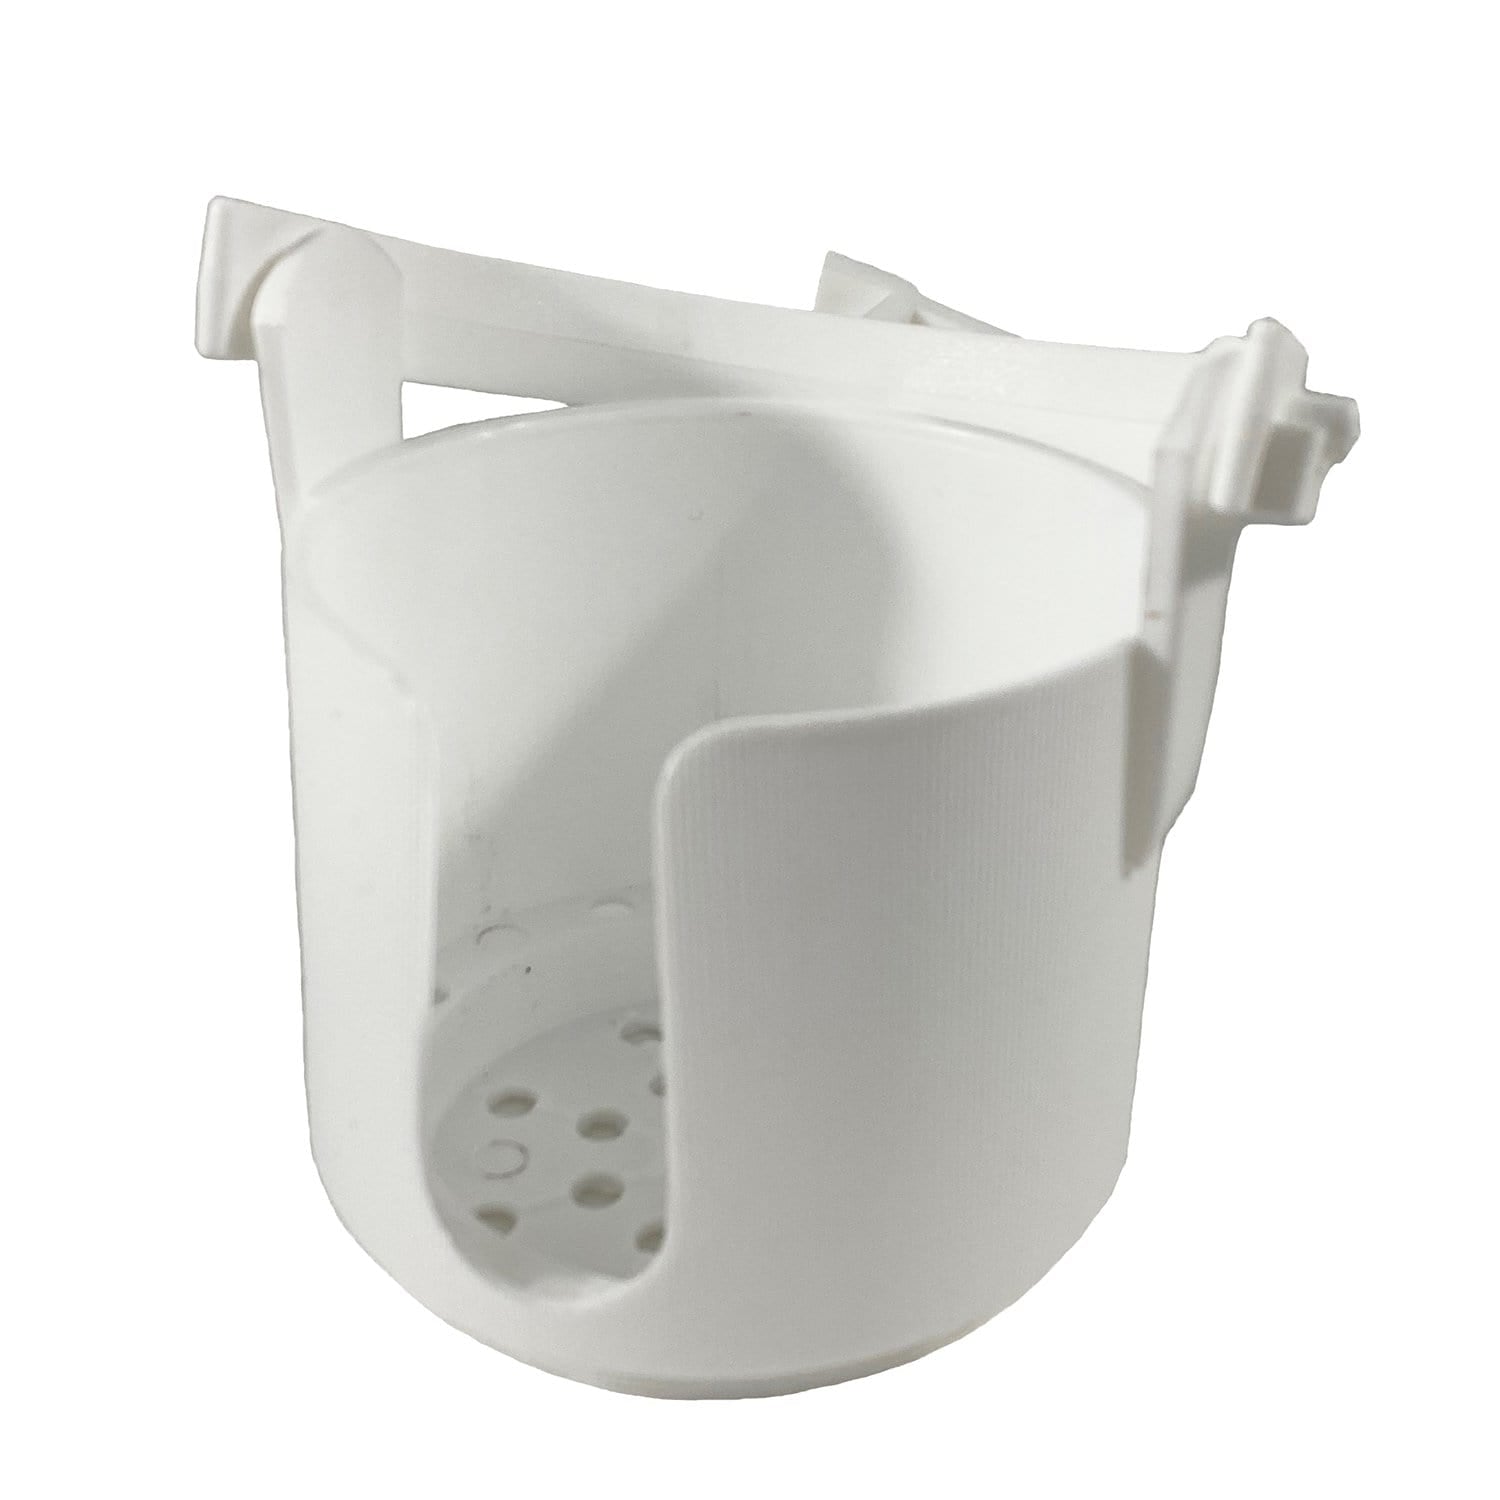 Attwood 11631-4 Gimballed Cup / Drink Holder - White